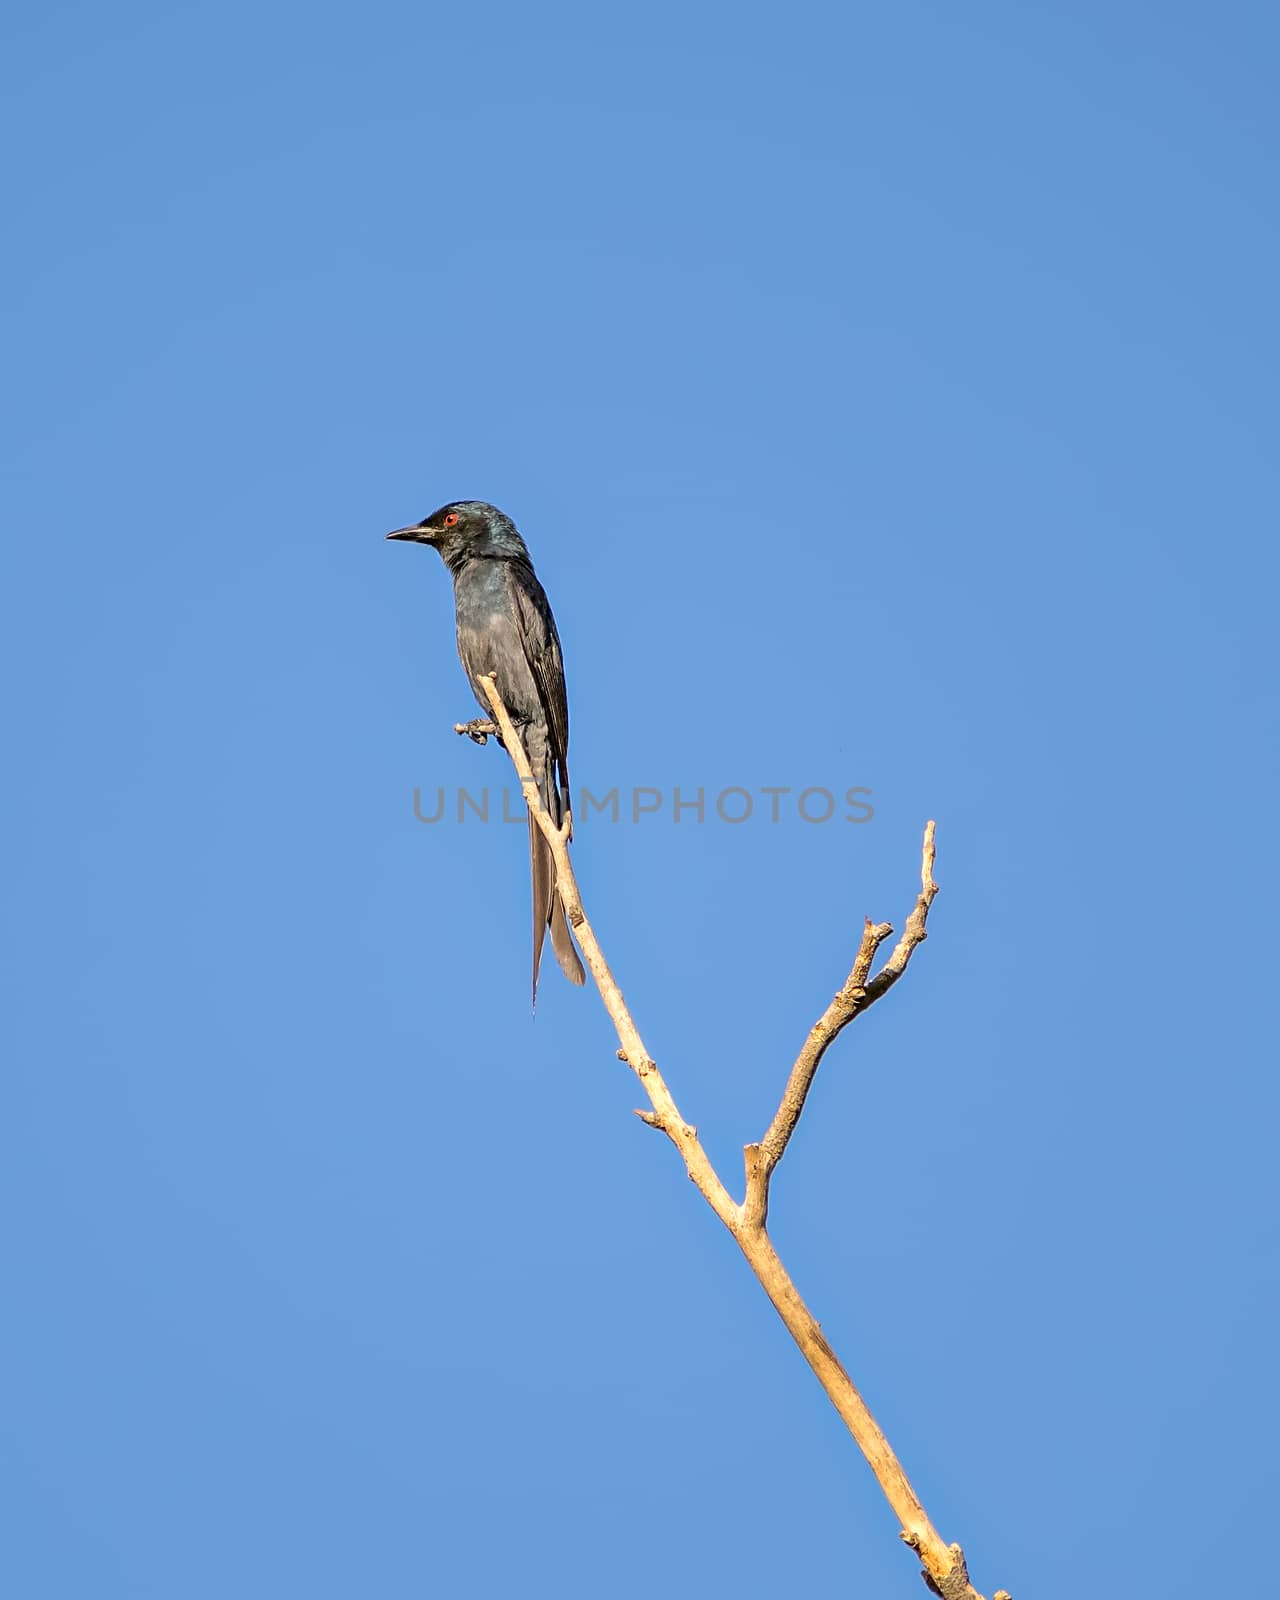 Grey bellied cuckoo(Cacomantis passerinus) sitting on a dry tree branch with clear blue sky background in Sunlight.